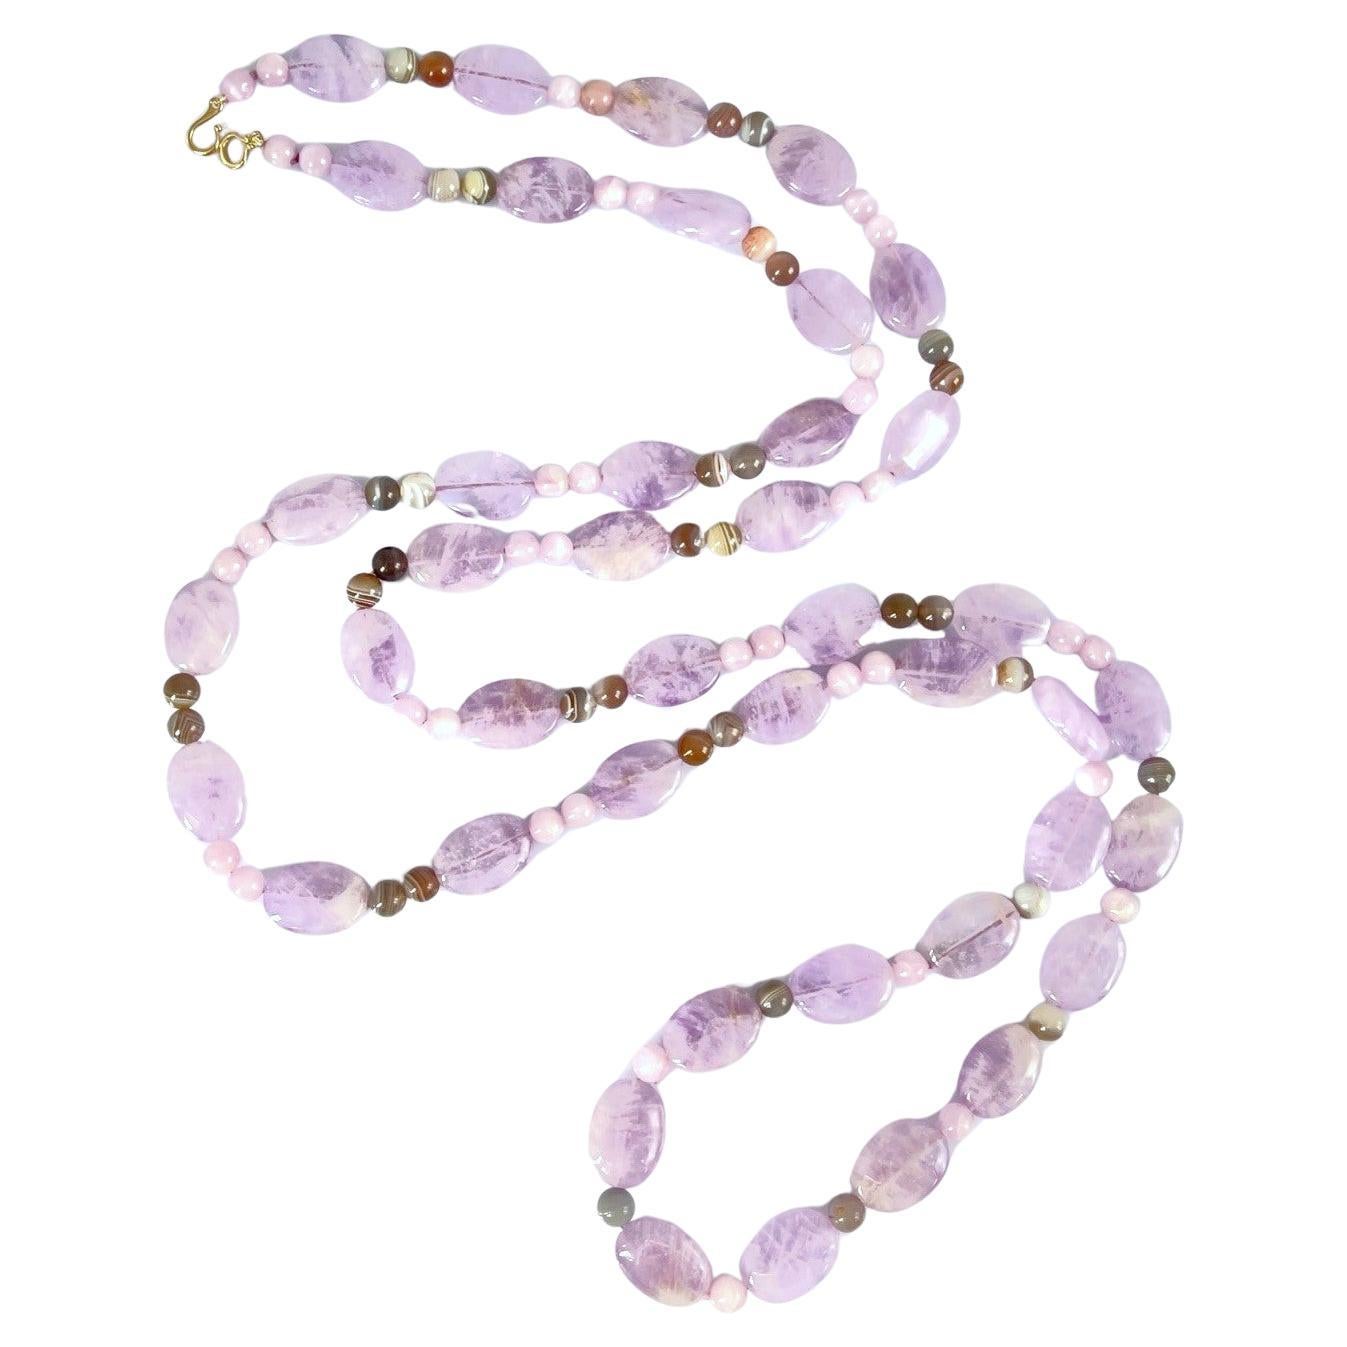 This wonderfully versatile necklace features elegant rose de France amethyst beads combined with pinkish lavender kunzite and beautifully banded smoky quartz! The round kunzite beads complement the delicate purple shade of the oval amethyst beads,